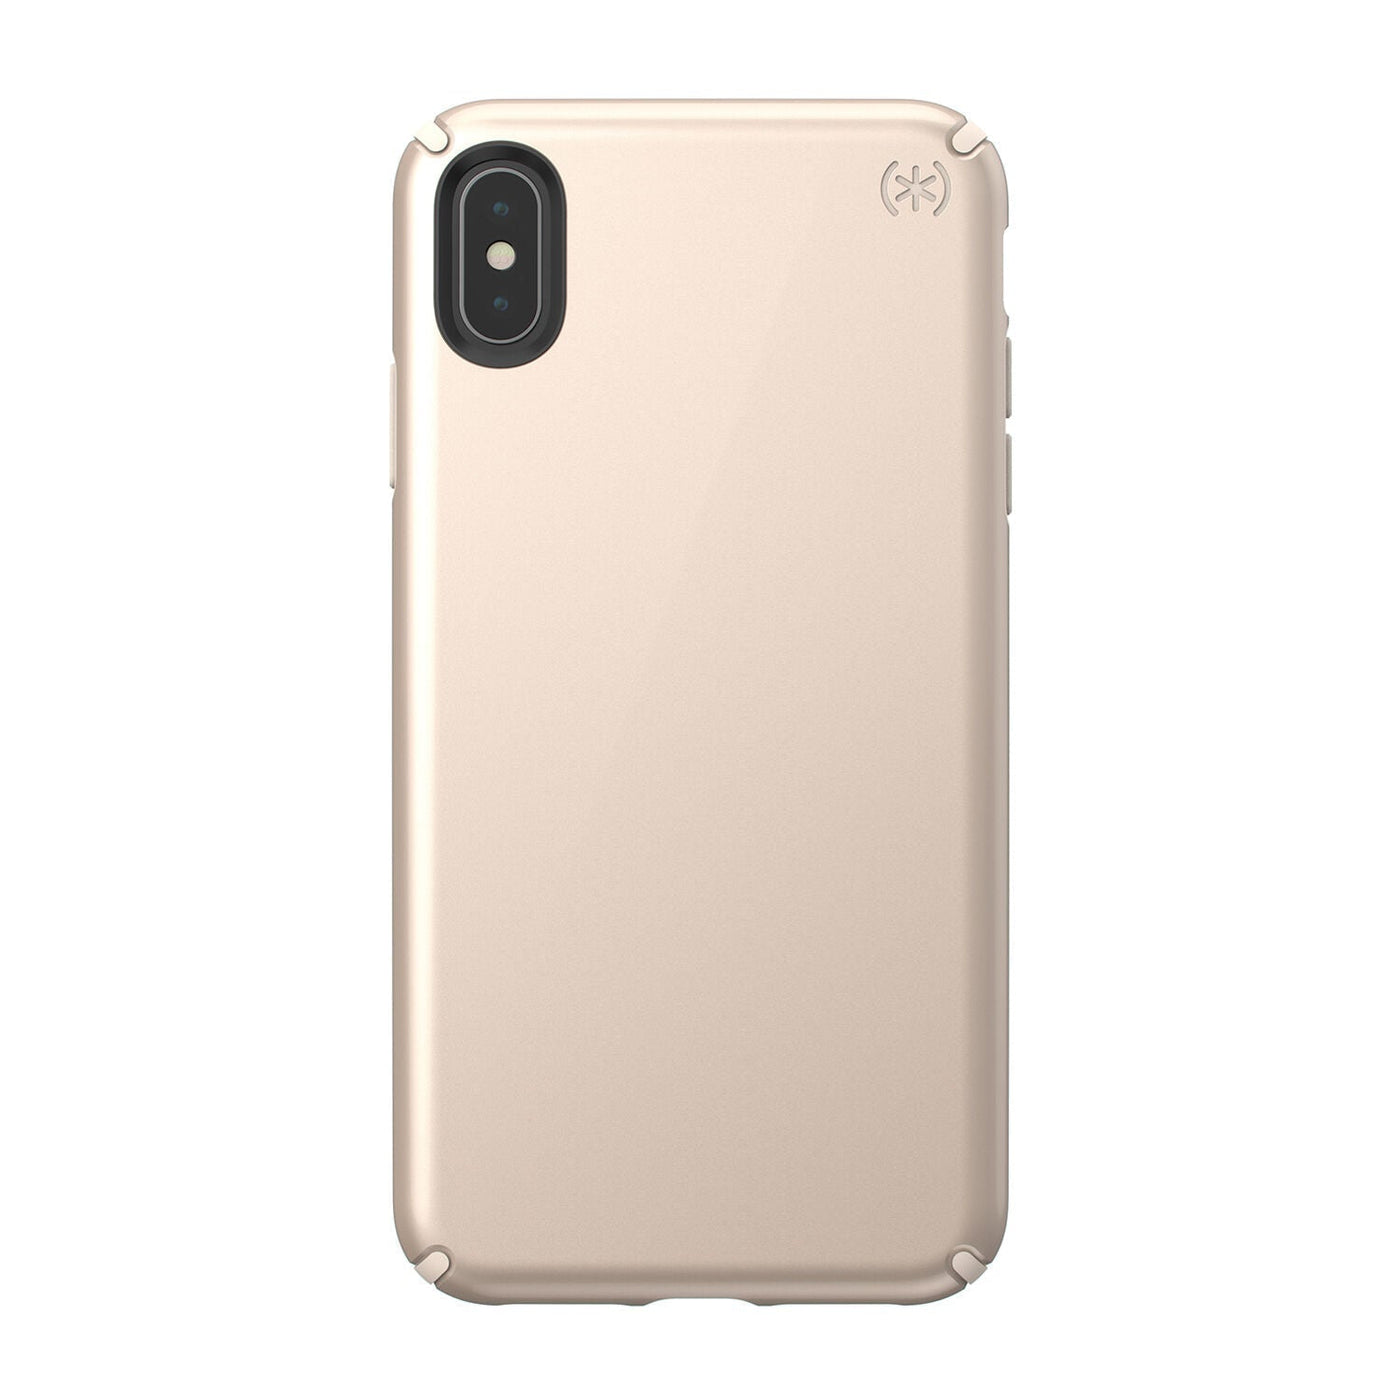 Speck Presidio WALLET iPhone XS Max Cases Best iPhone XS Max - $49.99